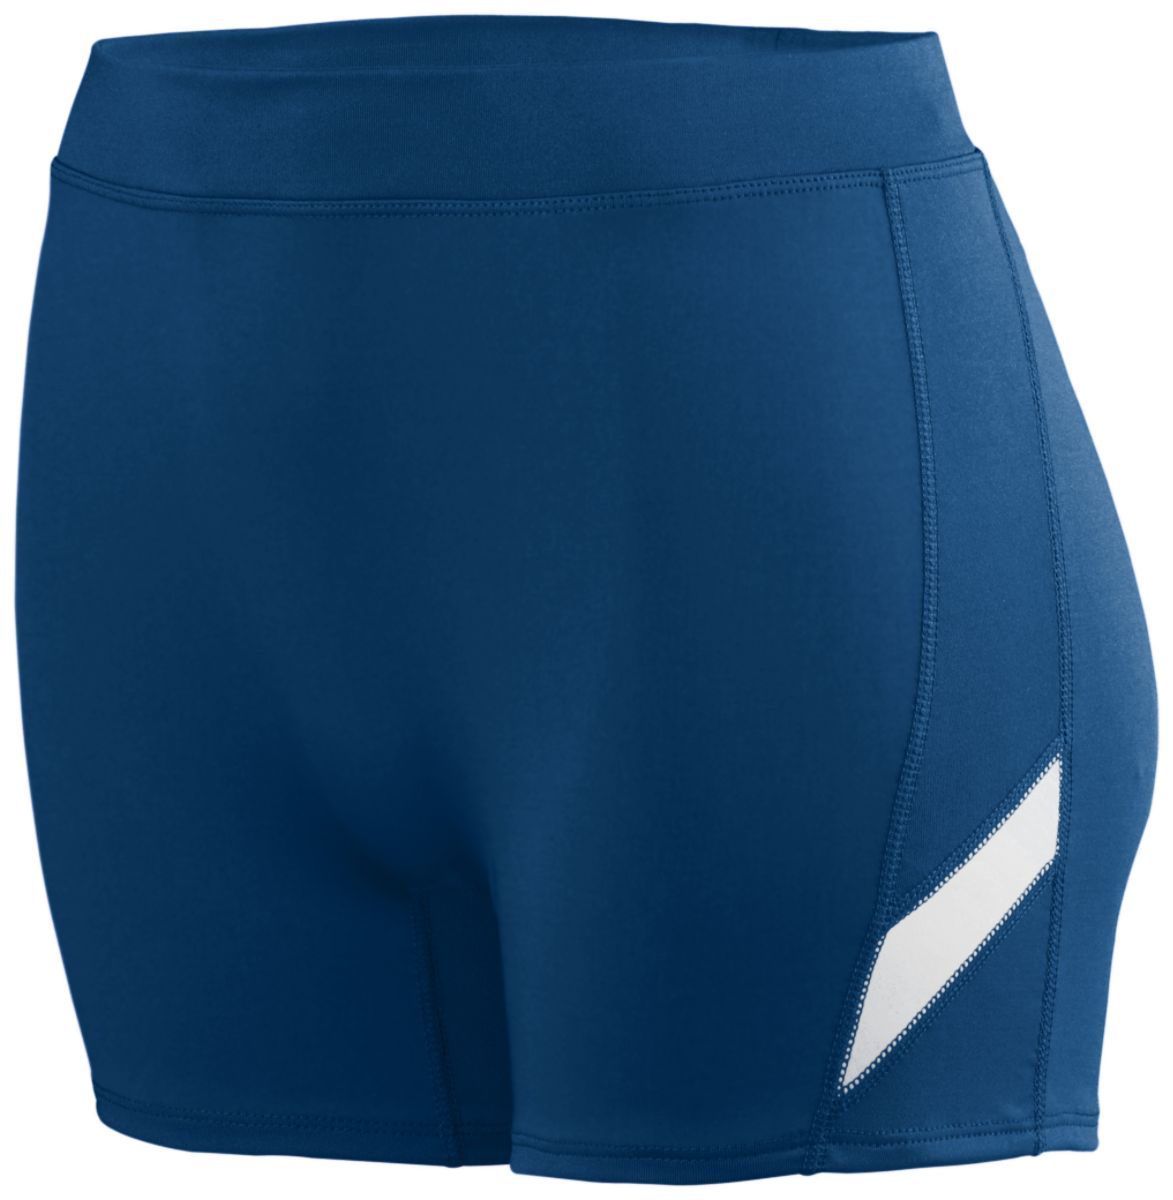 Augusta Sportswear Girls Stride Shorts in Navy/White  -Part of the Girls, Augusta-Products, Volleyball, Girls-Shorts product lines at KanaleyCreations.com